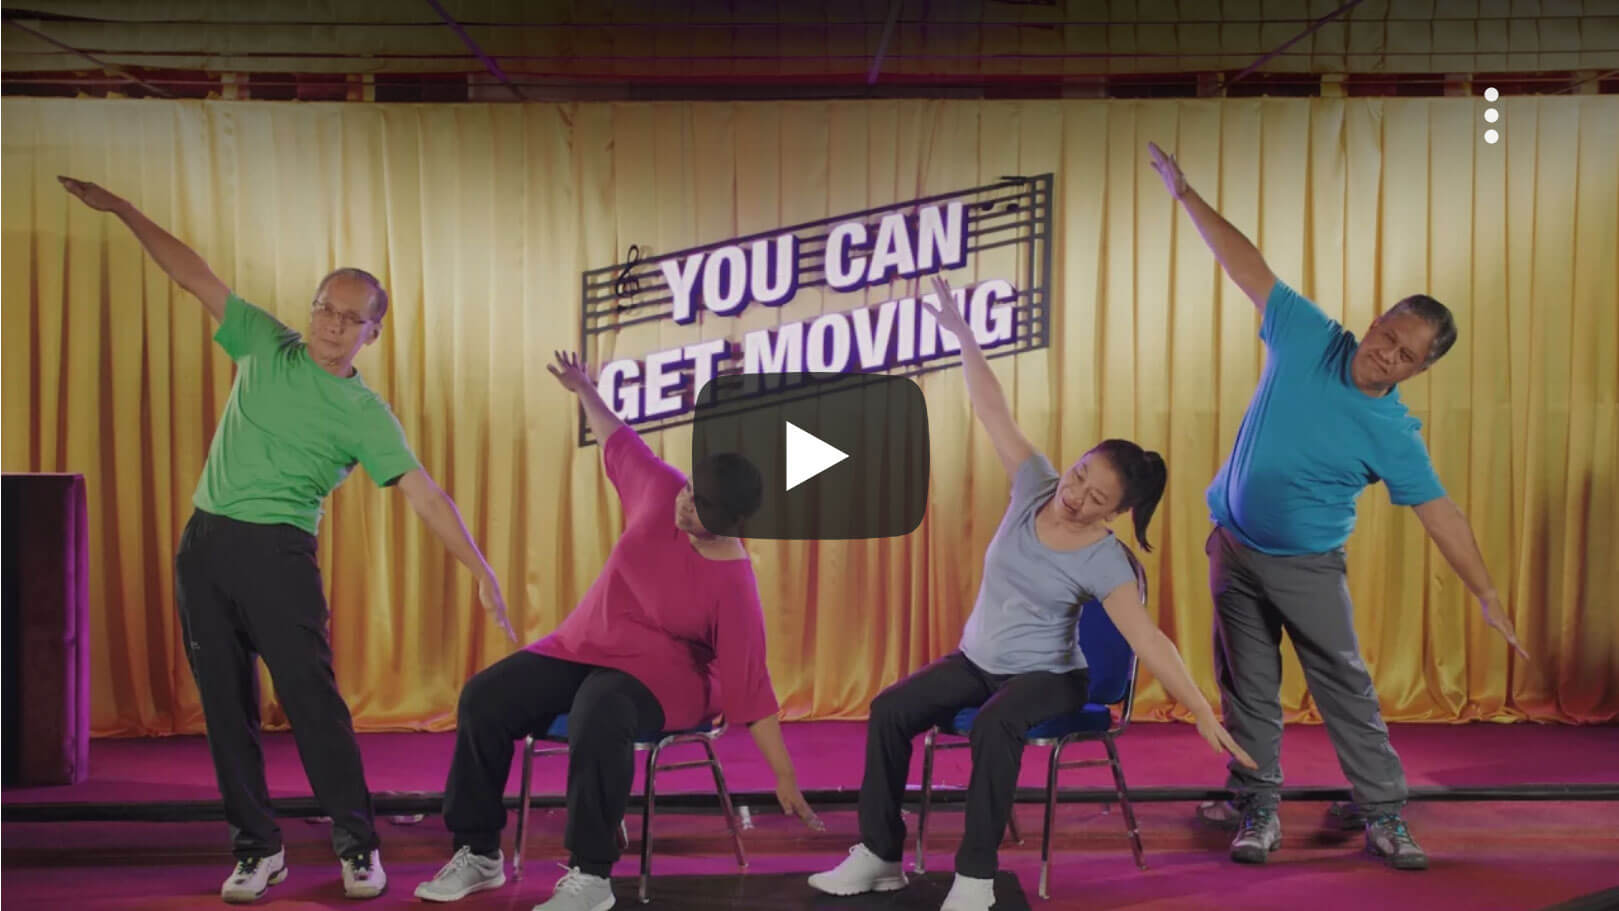 You Can Get Moving - Step by Step Demonstration Video